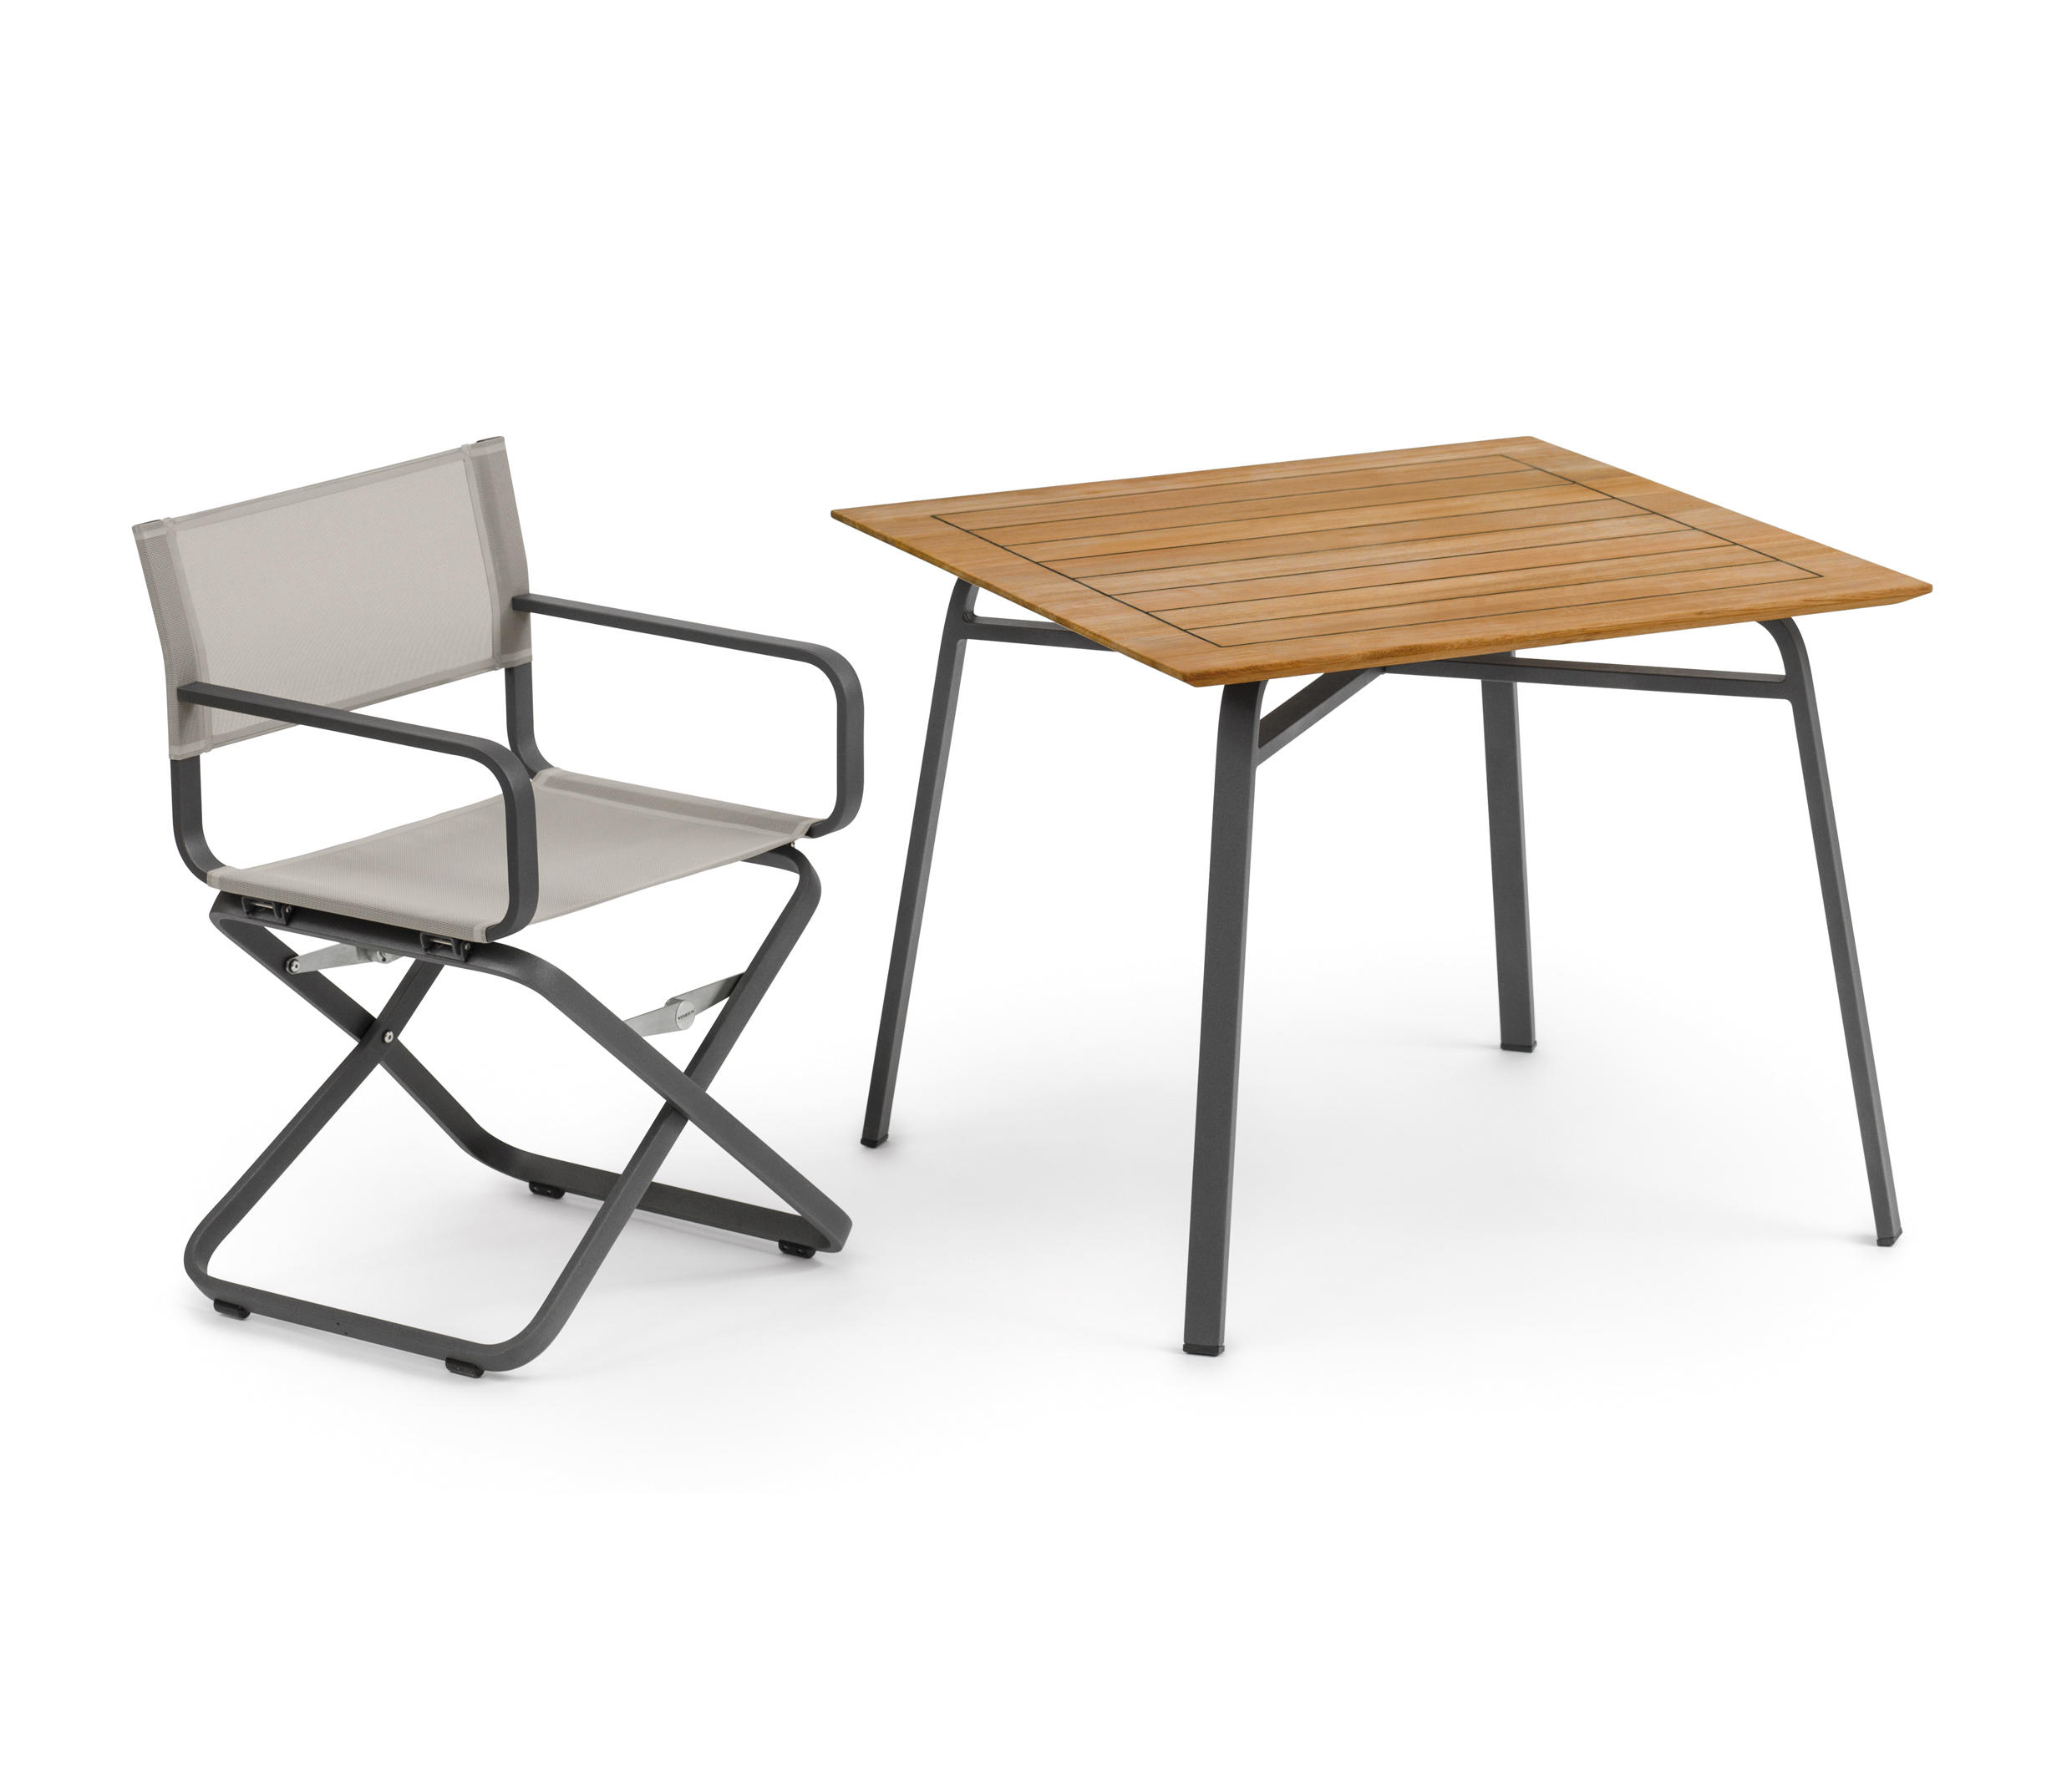 AHOI ARMCHAIR - Chairs from Weishäupl | Architonic